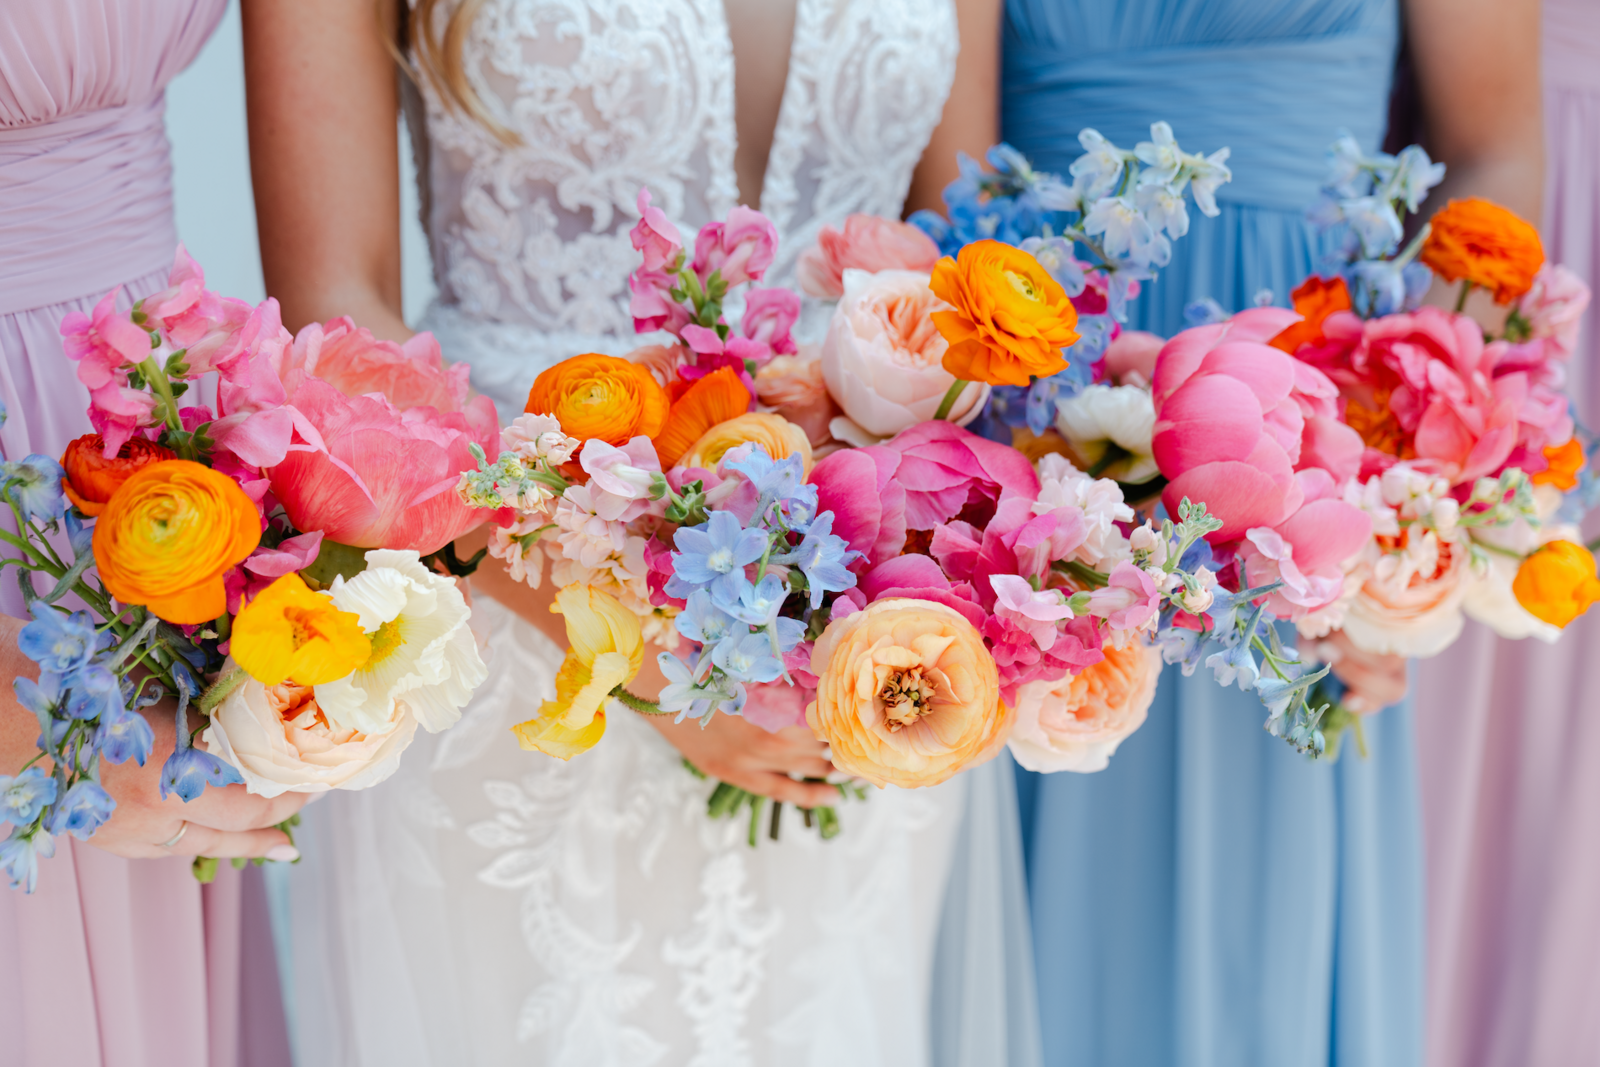 upclose image of florals bride and bridesmaids